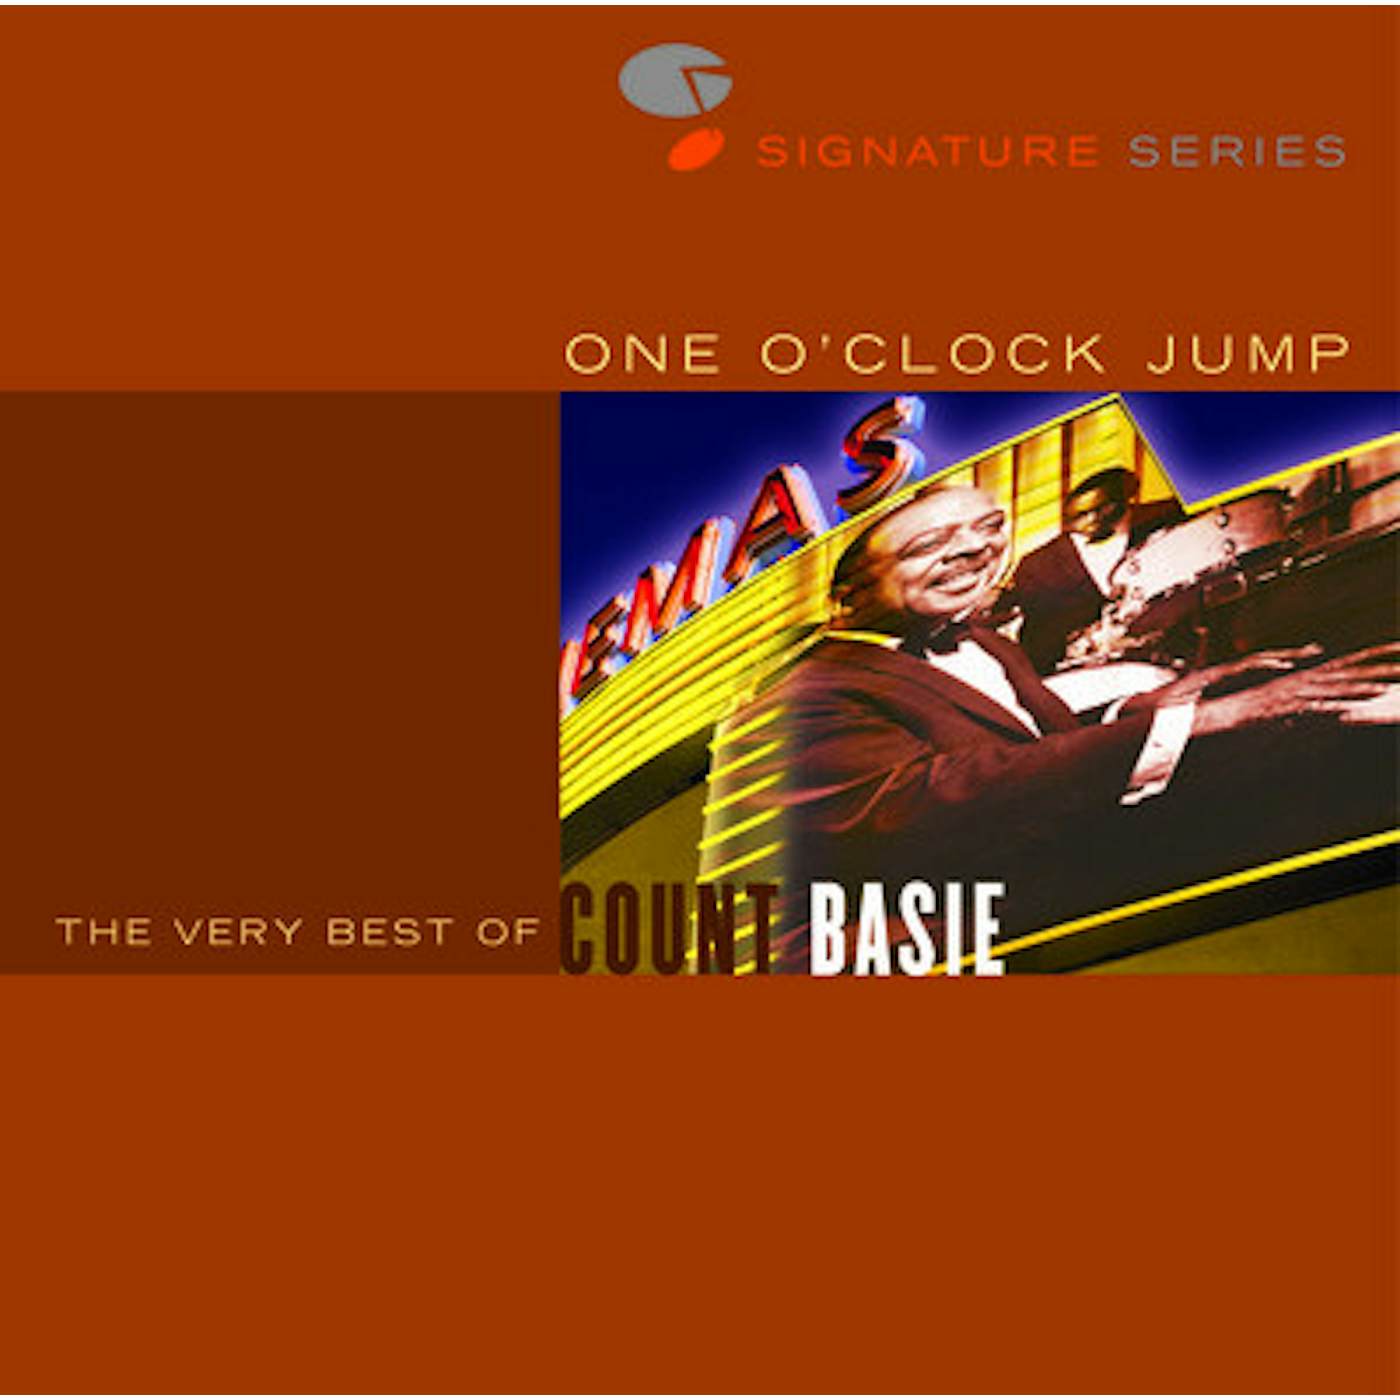 Count Basie Orchestra JAZZ SIGNATURES - ONE O'CLOCK JUMP: VERY BEST OF CD